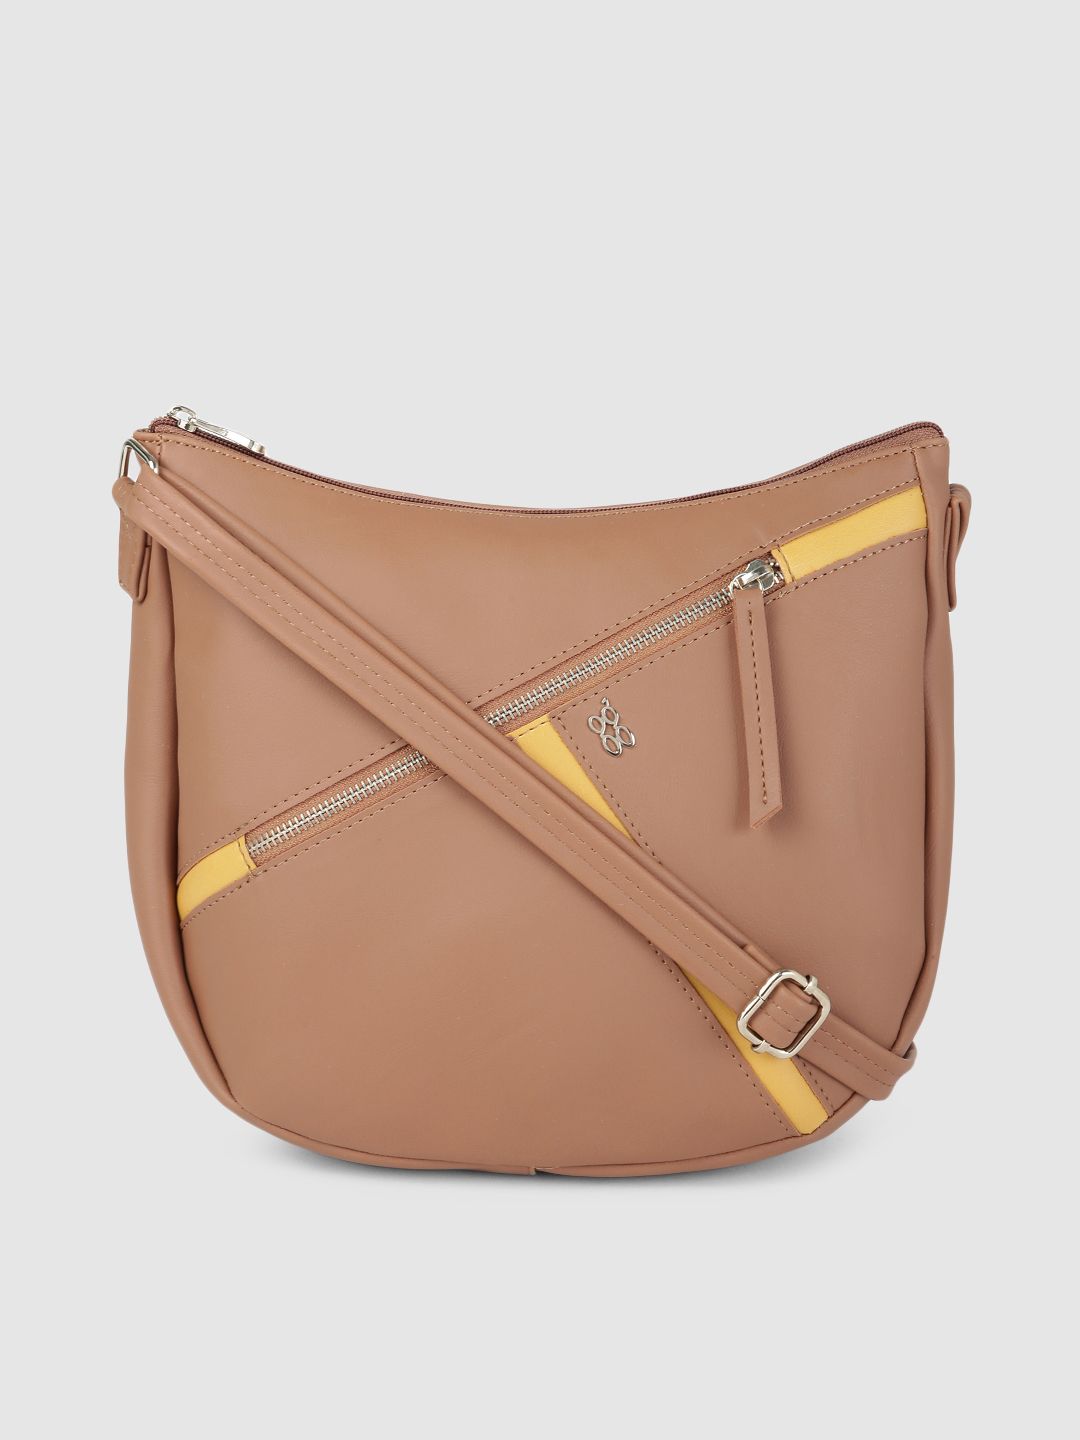 Baggit Beige Structured Sling Bag Price in India